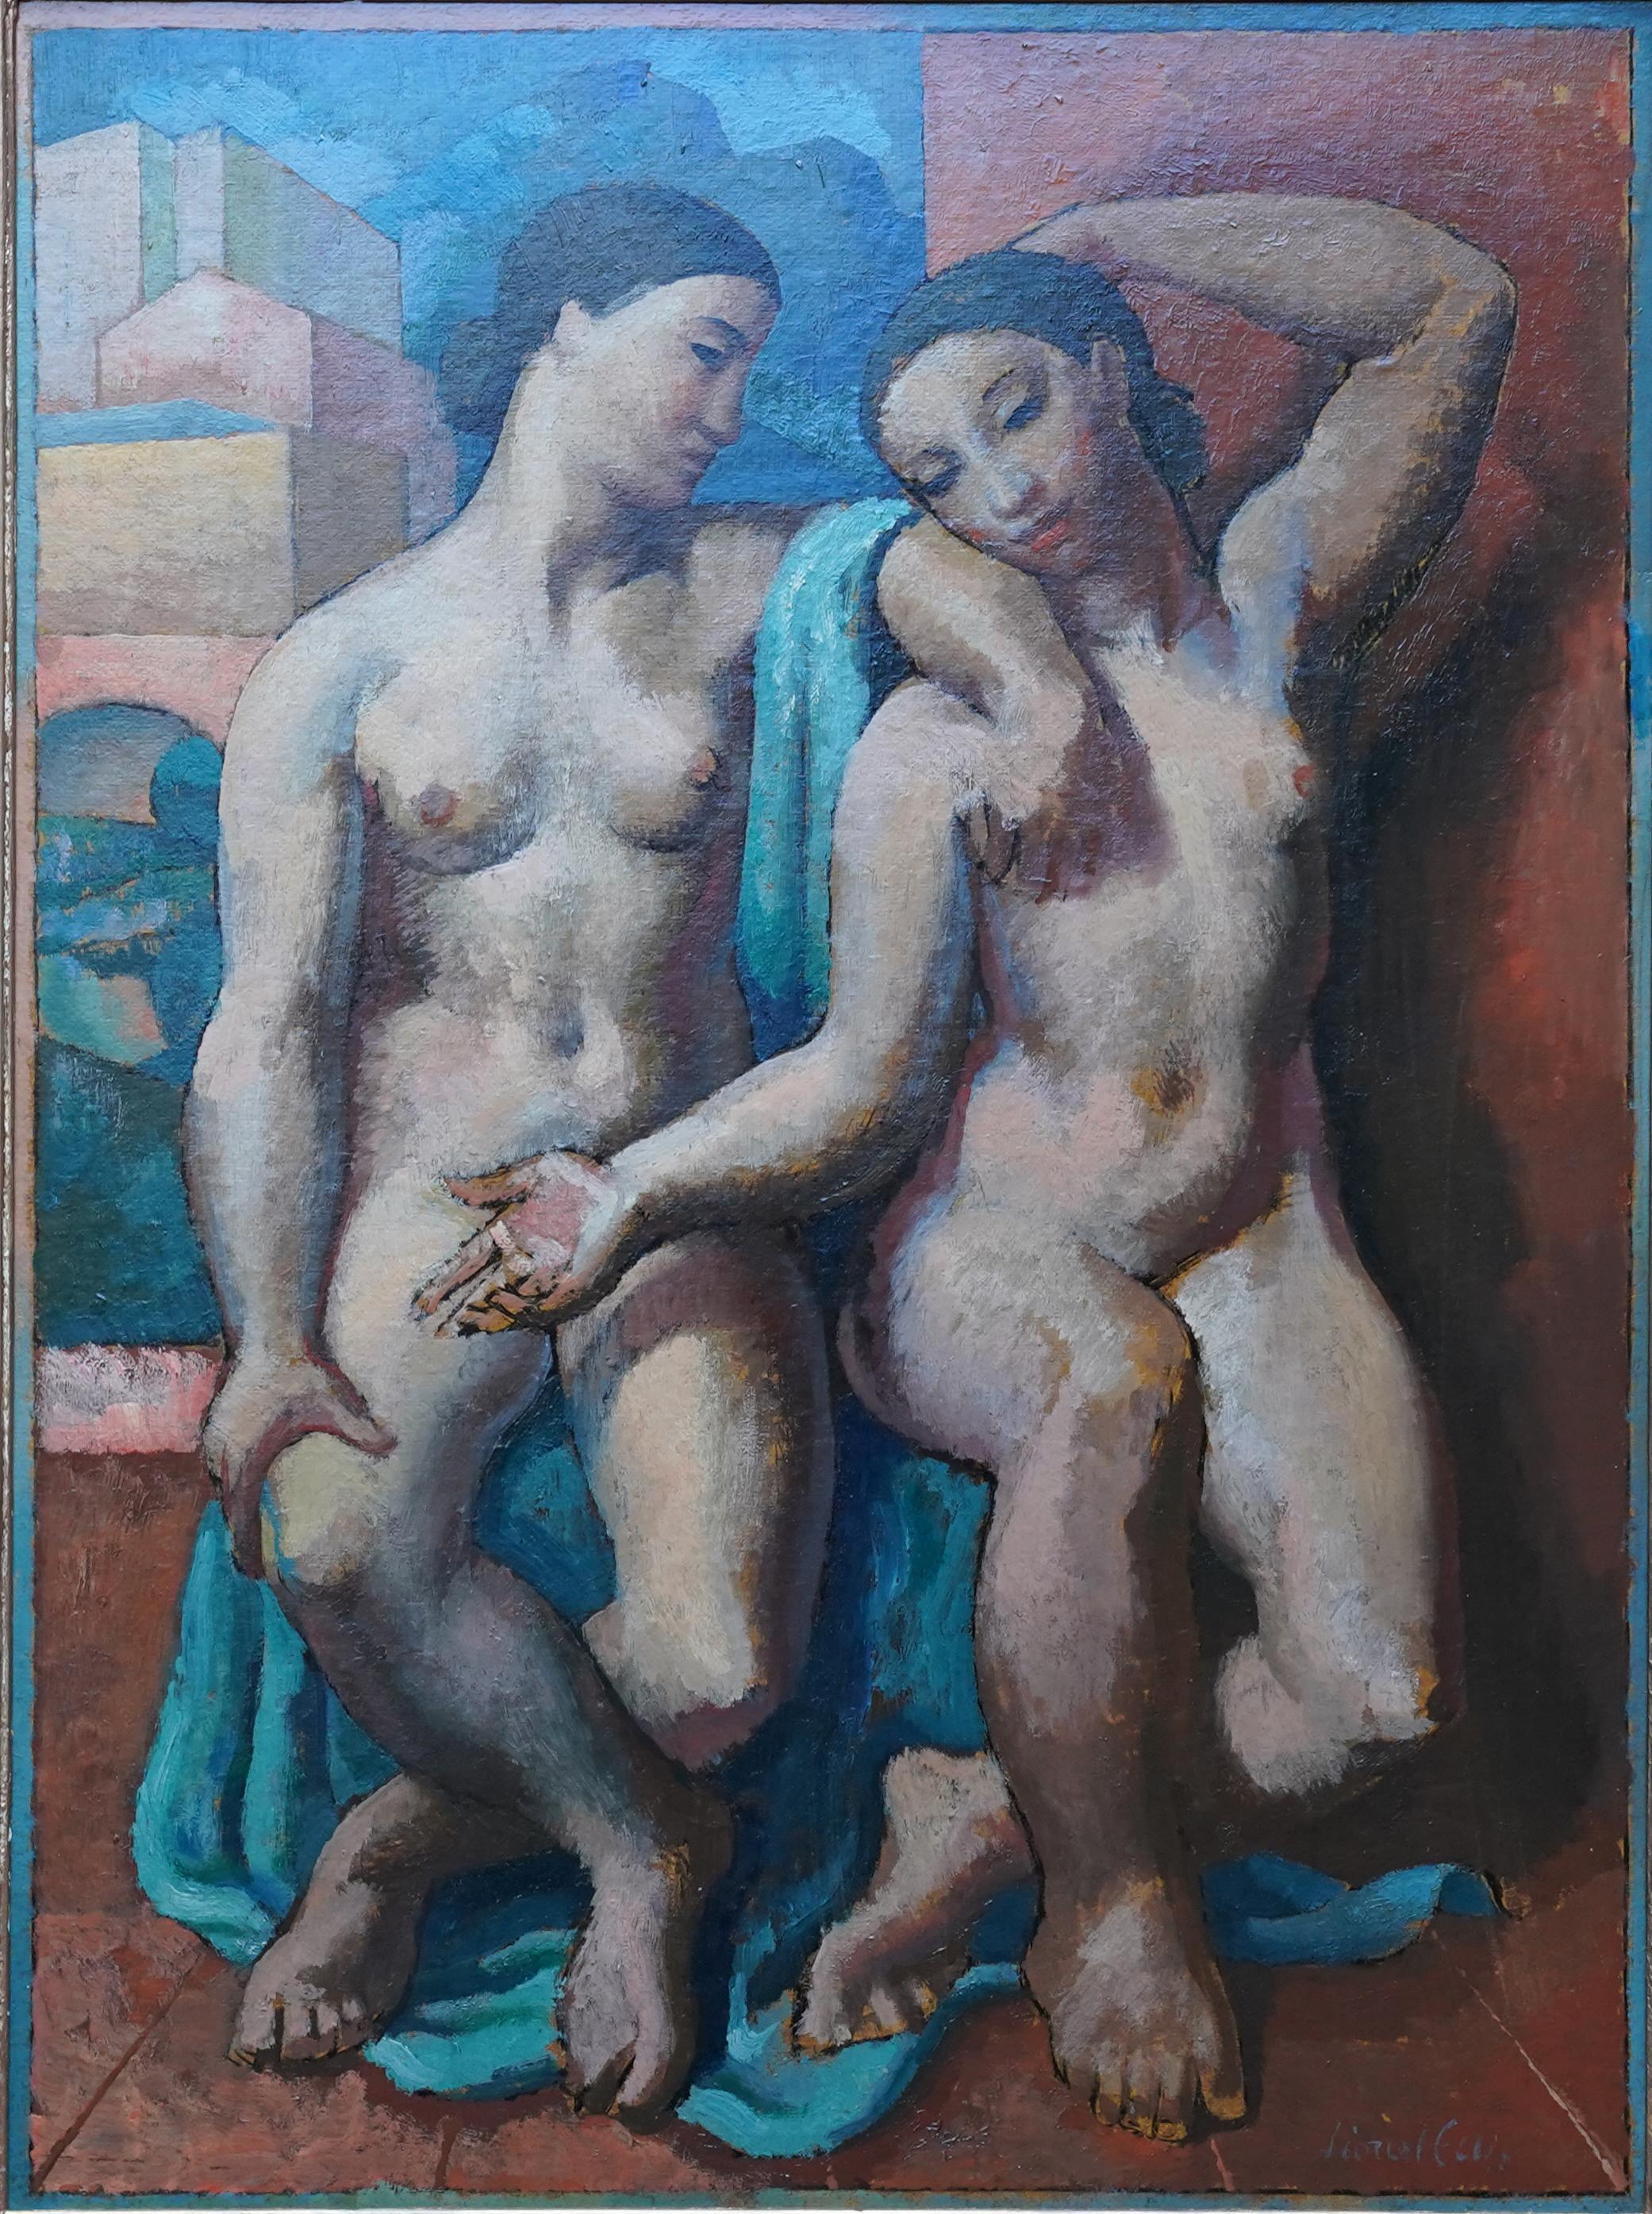 Portrait of Two Seated Nude Women - British Modernist 1930's oil painting - Painting by Lionel Ellis